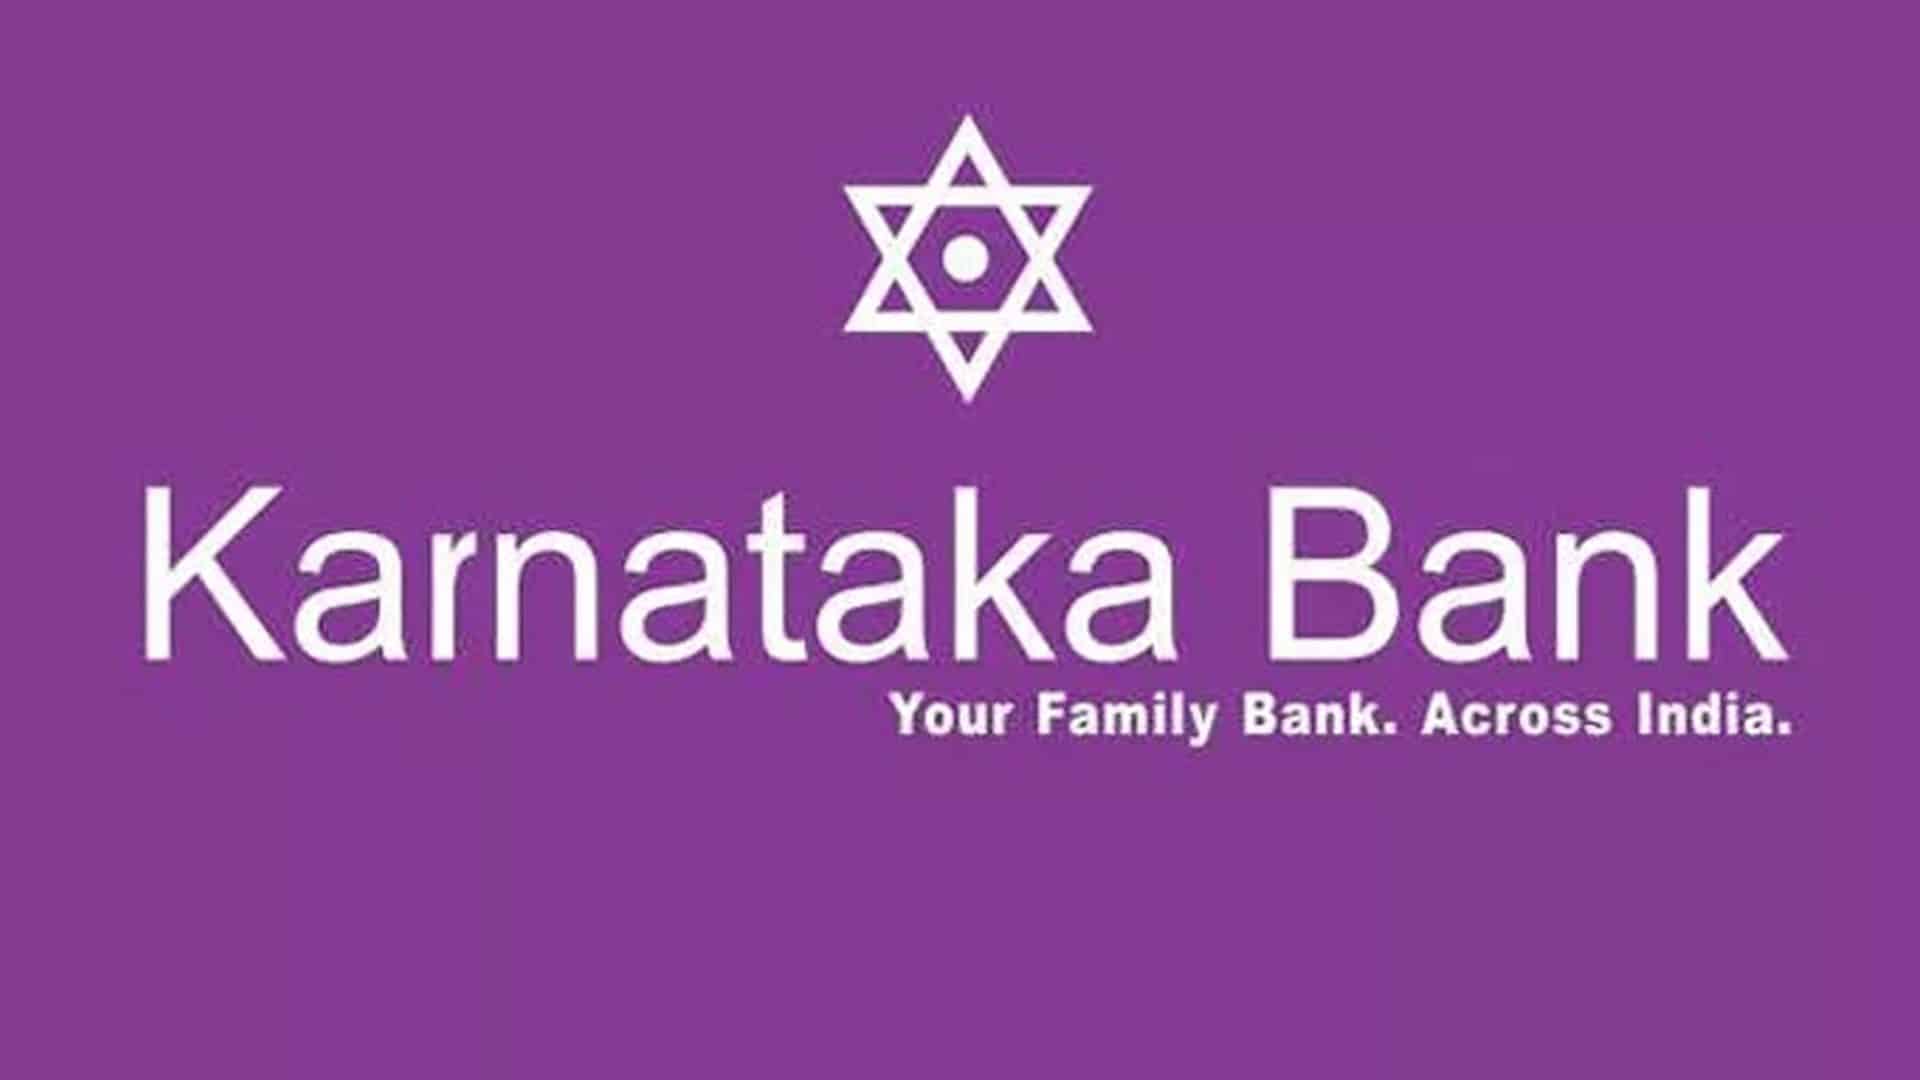 Karnataka Bank declares loan over Rs 160 cr to Reliance Home, Reliance Commercial as fraud